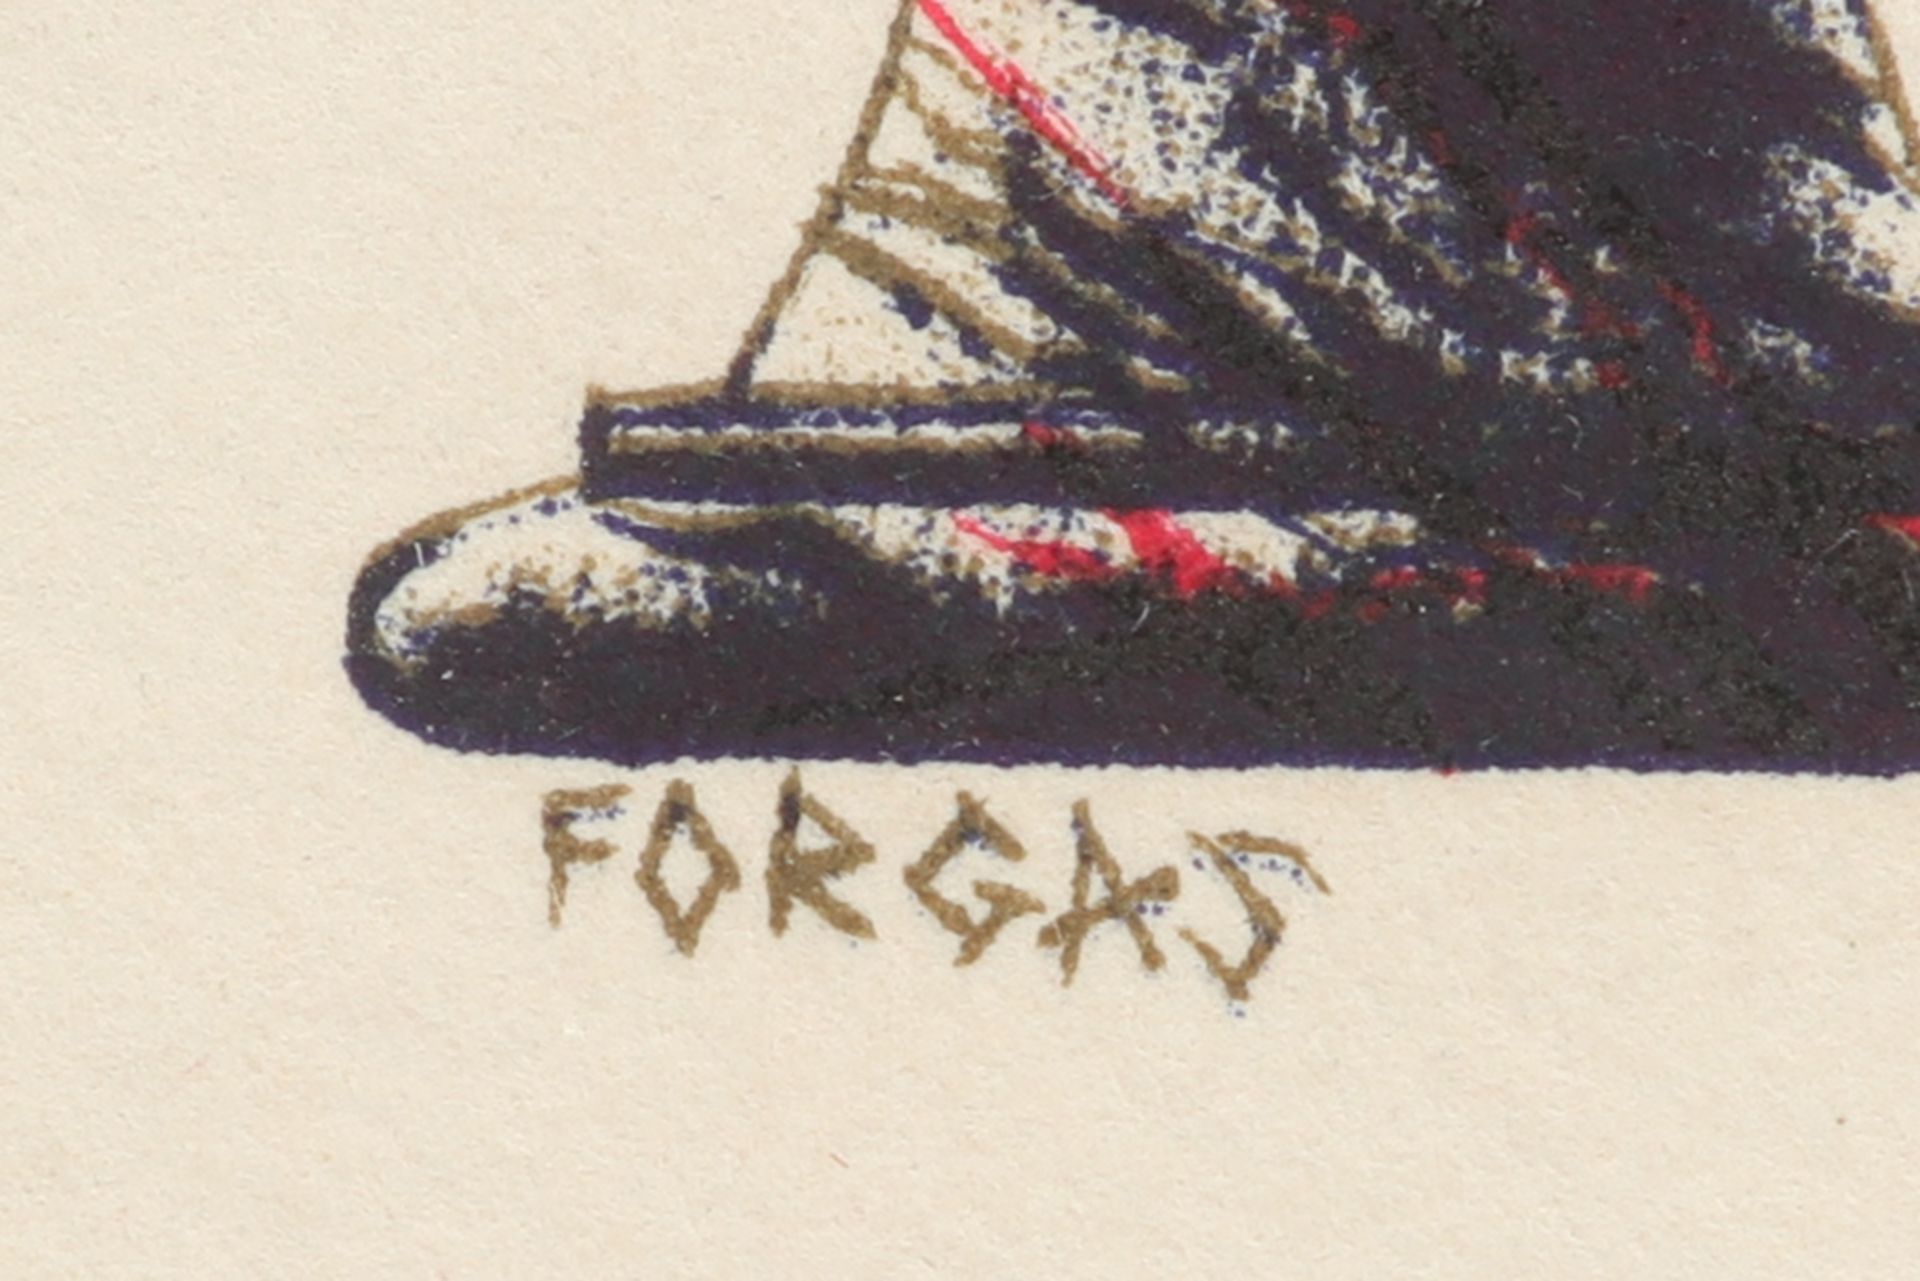 Forgas signed print in colors with a satirical theme || FORGAS (20° - 21° EEUW) print in kleuren met - Image 2 of 3